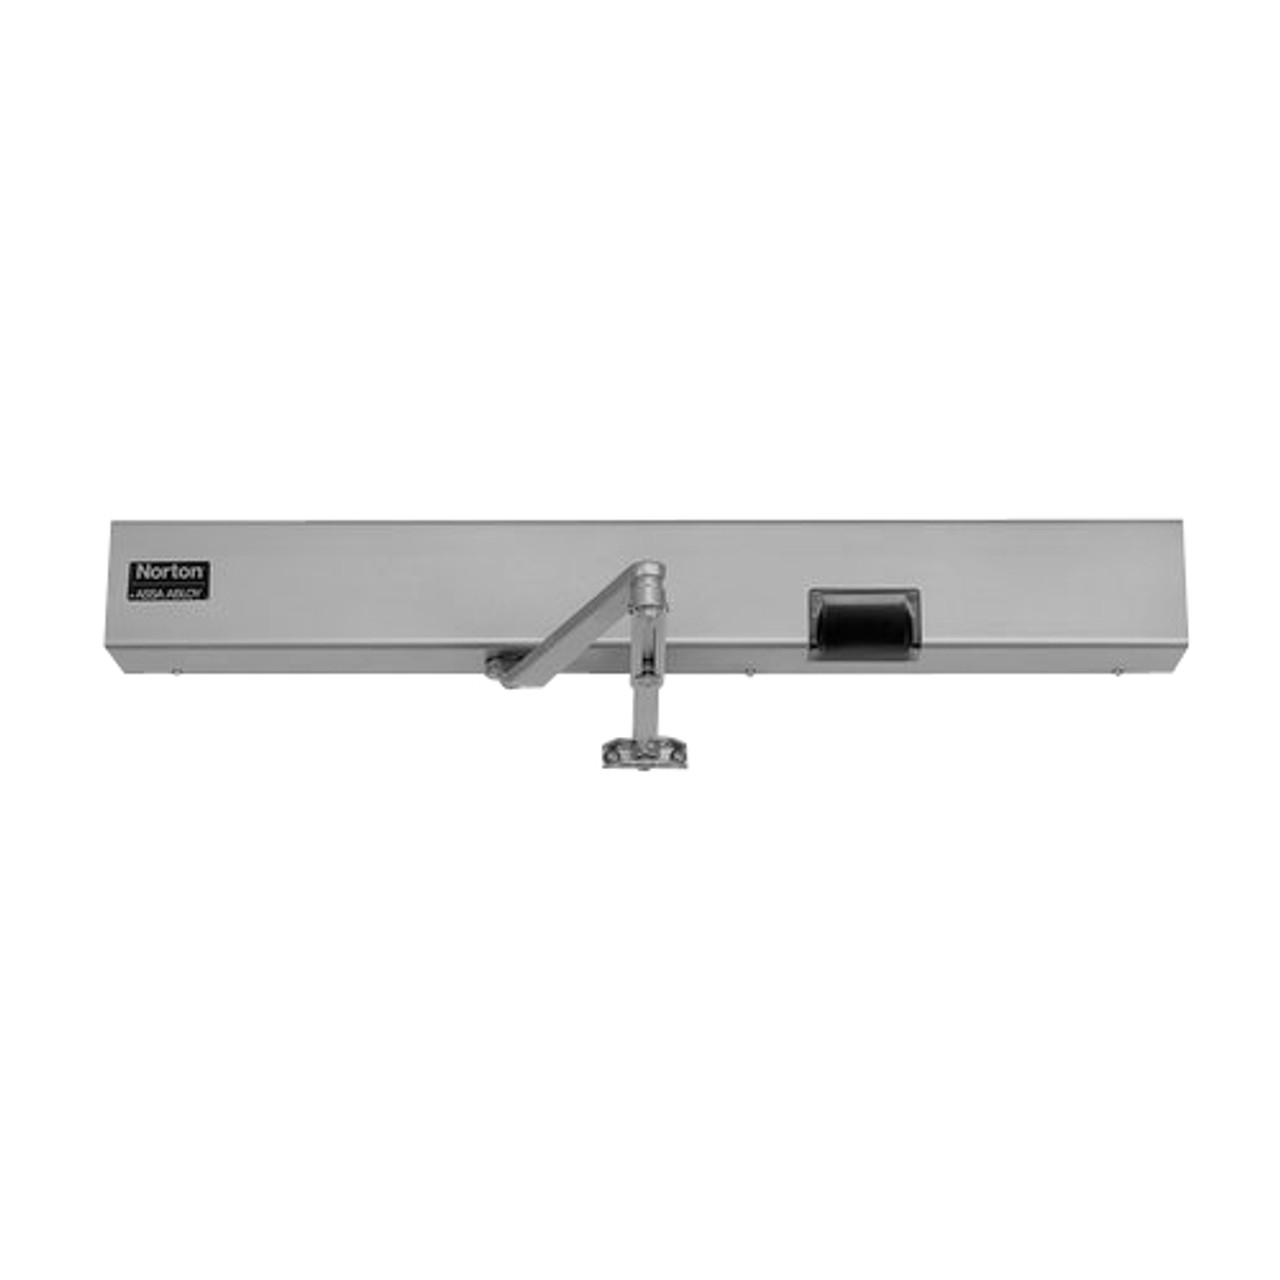 7122SZ-DZ-RH-120VAC-689 Norton 7100SZ Series Safe Zone Multi-Point Closer/Holder with Motion Sensor and Push Side Double Lever 11 inch Main Arm in Aluminum Finish